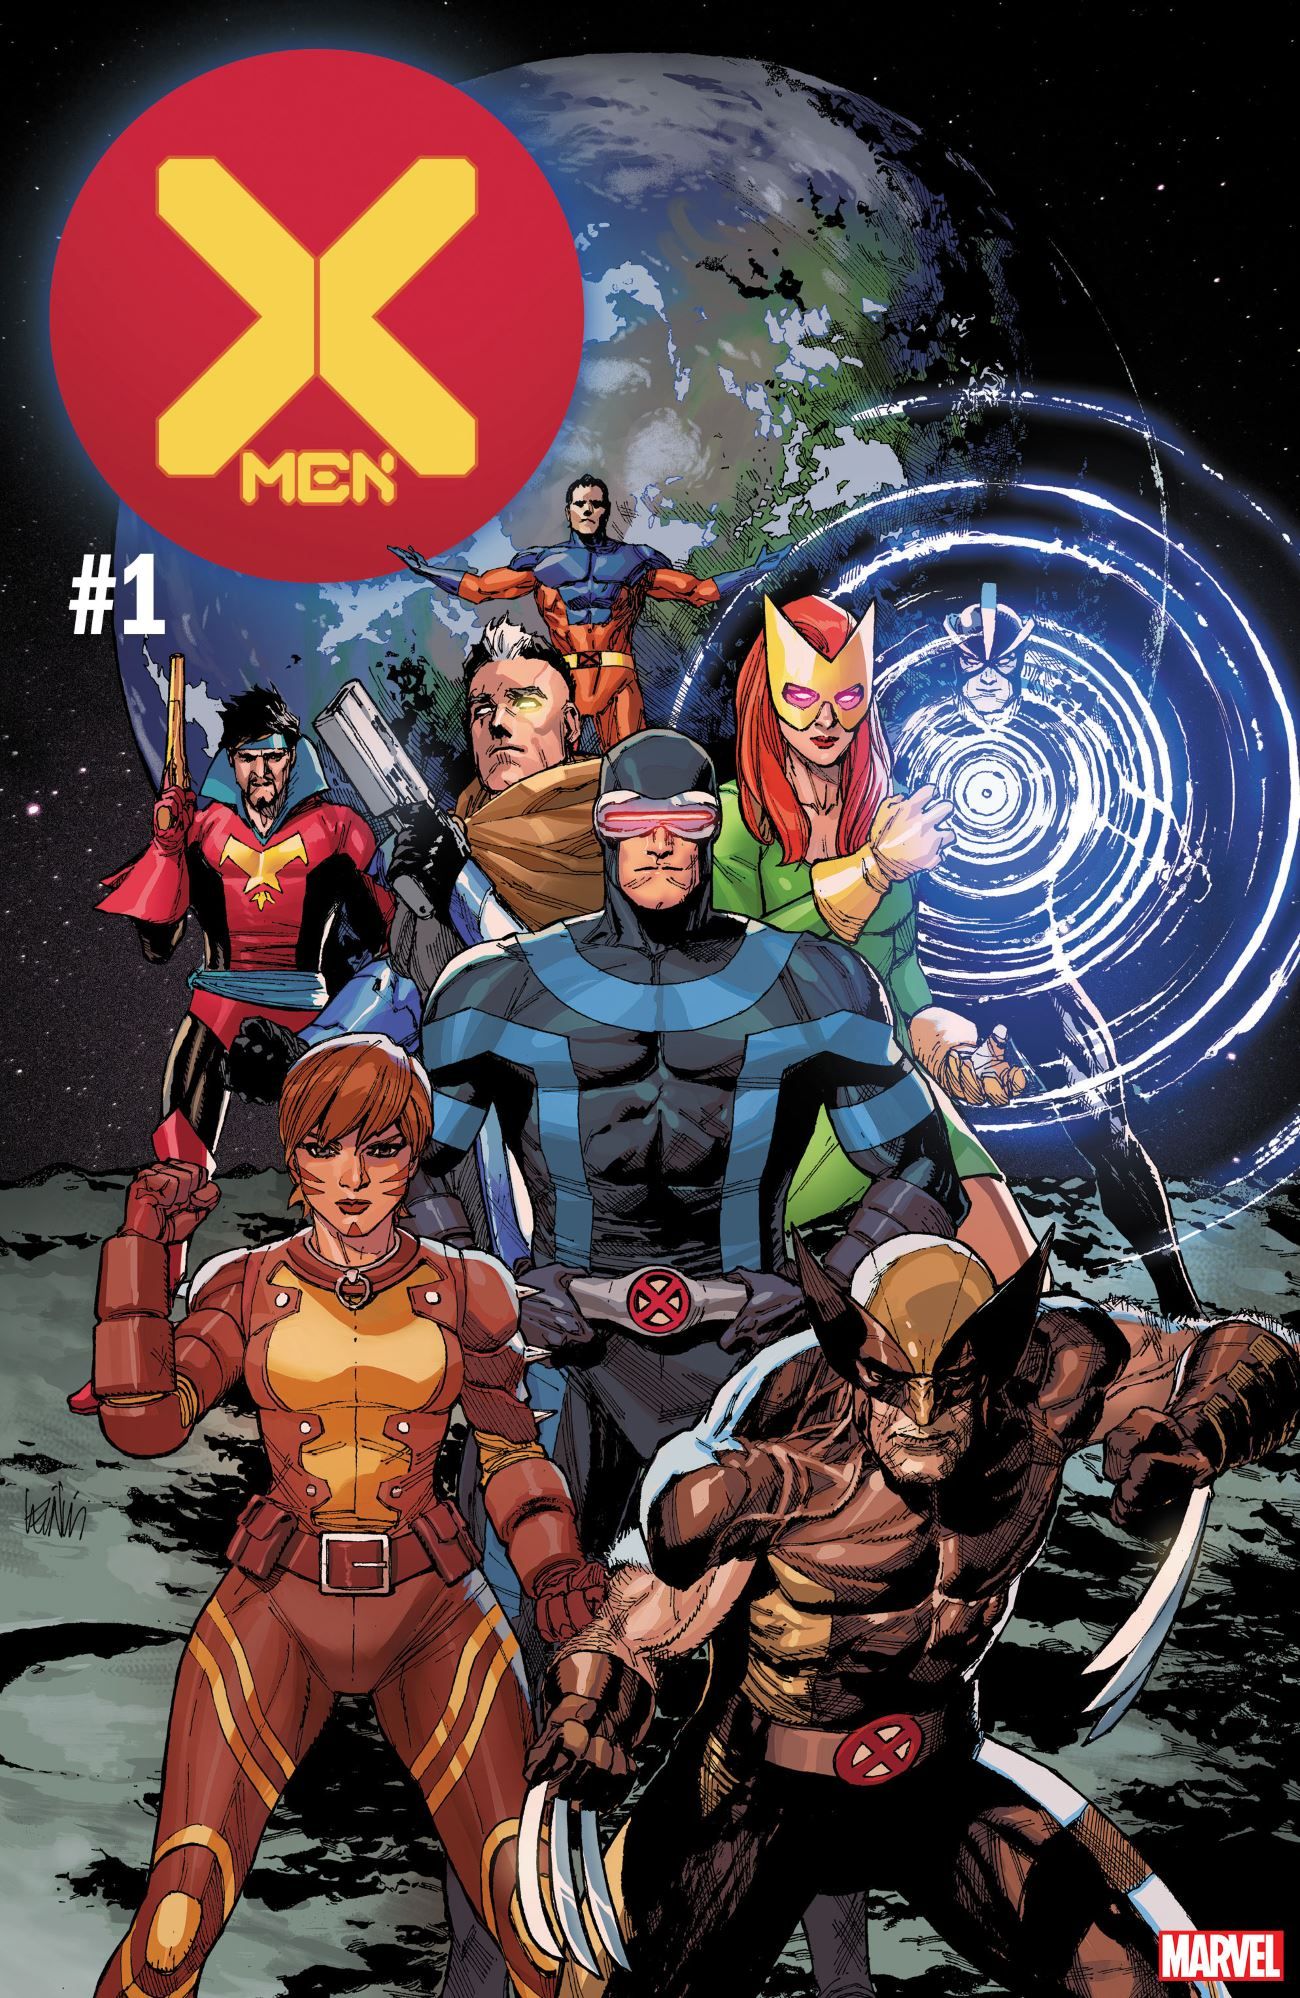 Cyclops Brings His ENTIRE Family To The New X-Men